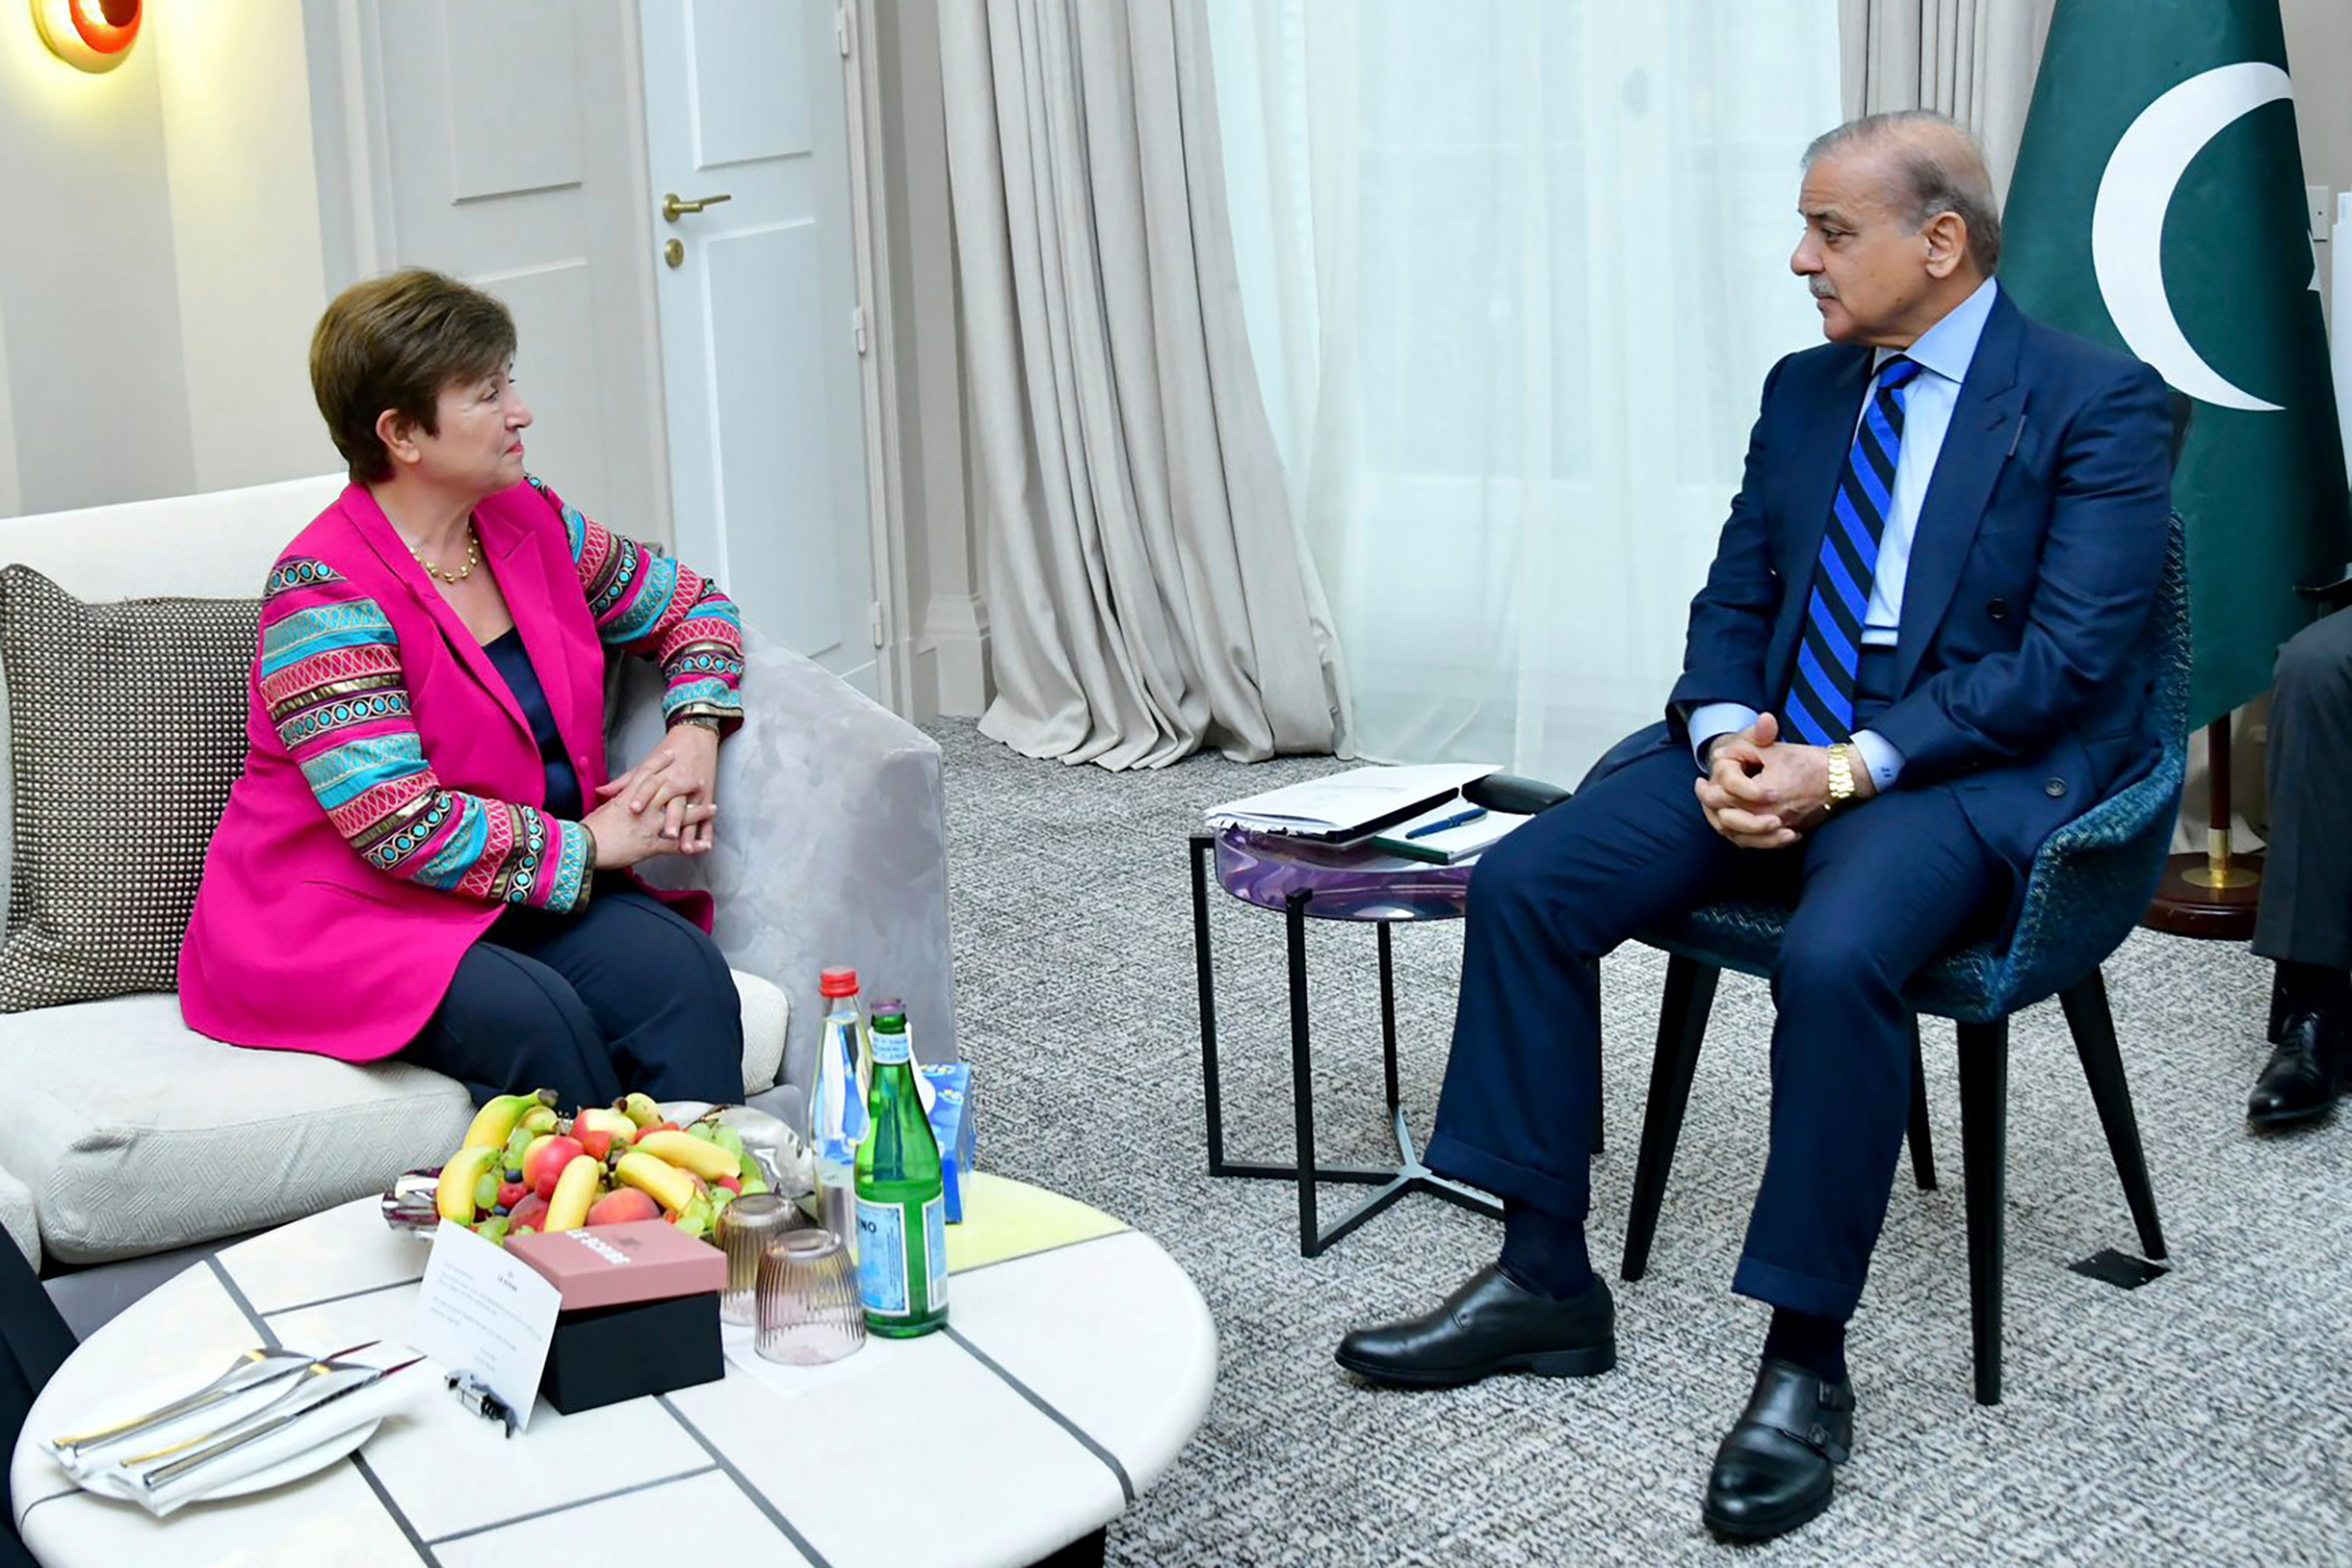 Prime Minister Shahbaz Sharif, right, meets with International Monetary Fund's Managing Director Kristalina Georgieva in Paris, France, on June 22, hoping to unlock a $6 billion bailout and gain the release of a critical tranche of $1.1 billion in loans which has been on hold since November. (Prime Minister Office/AP)